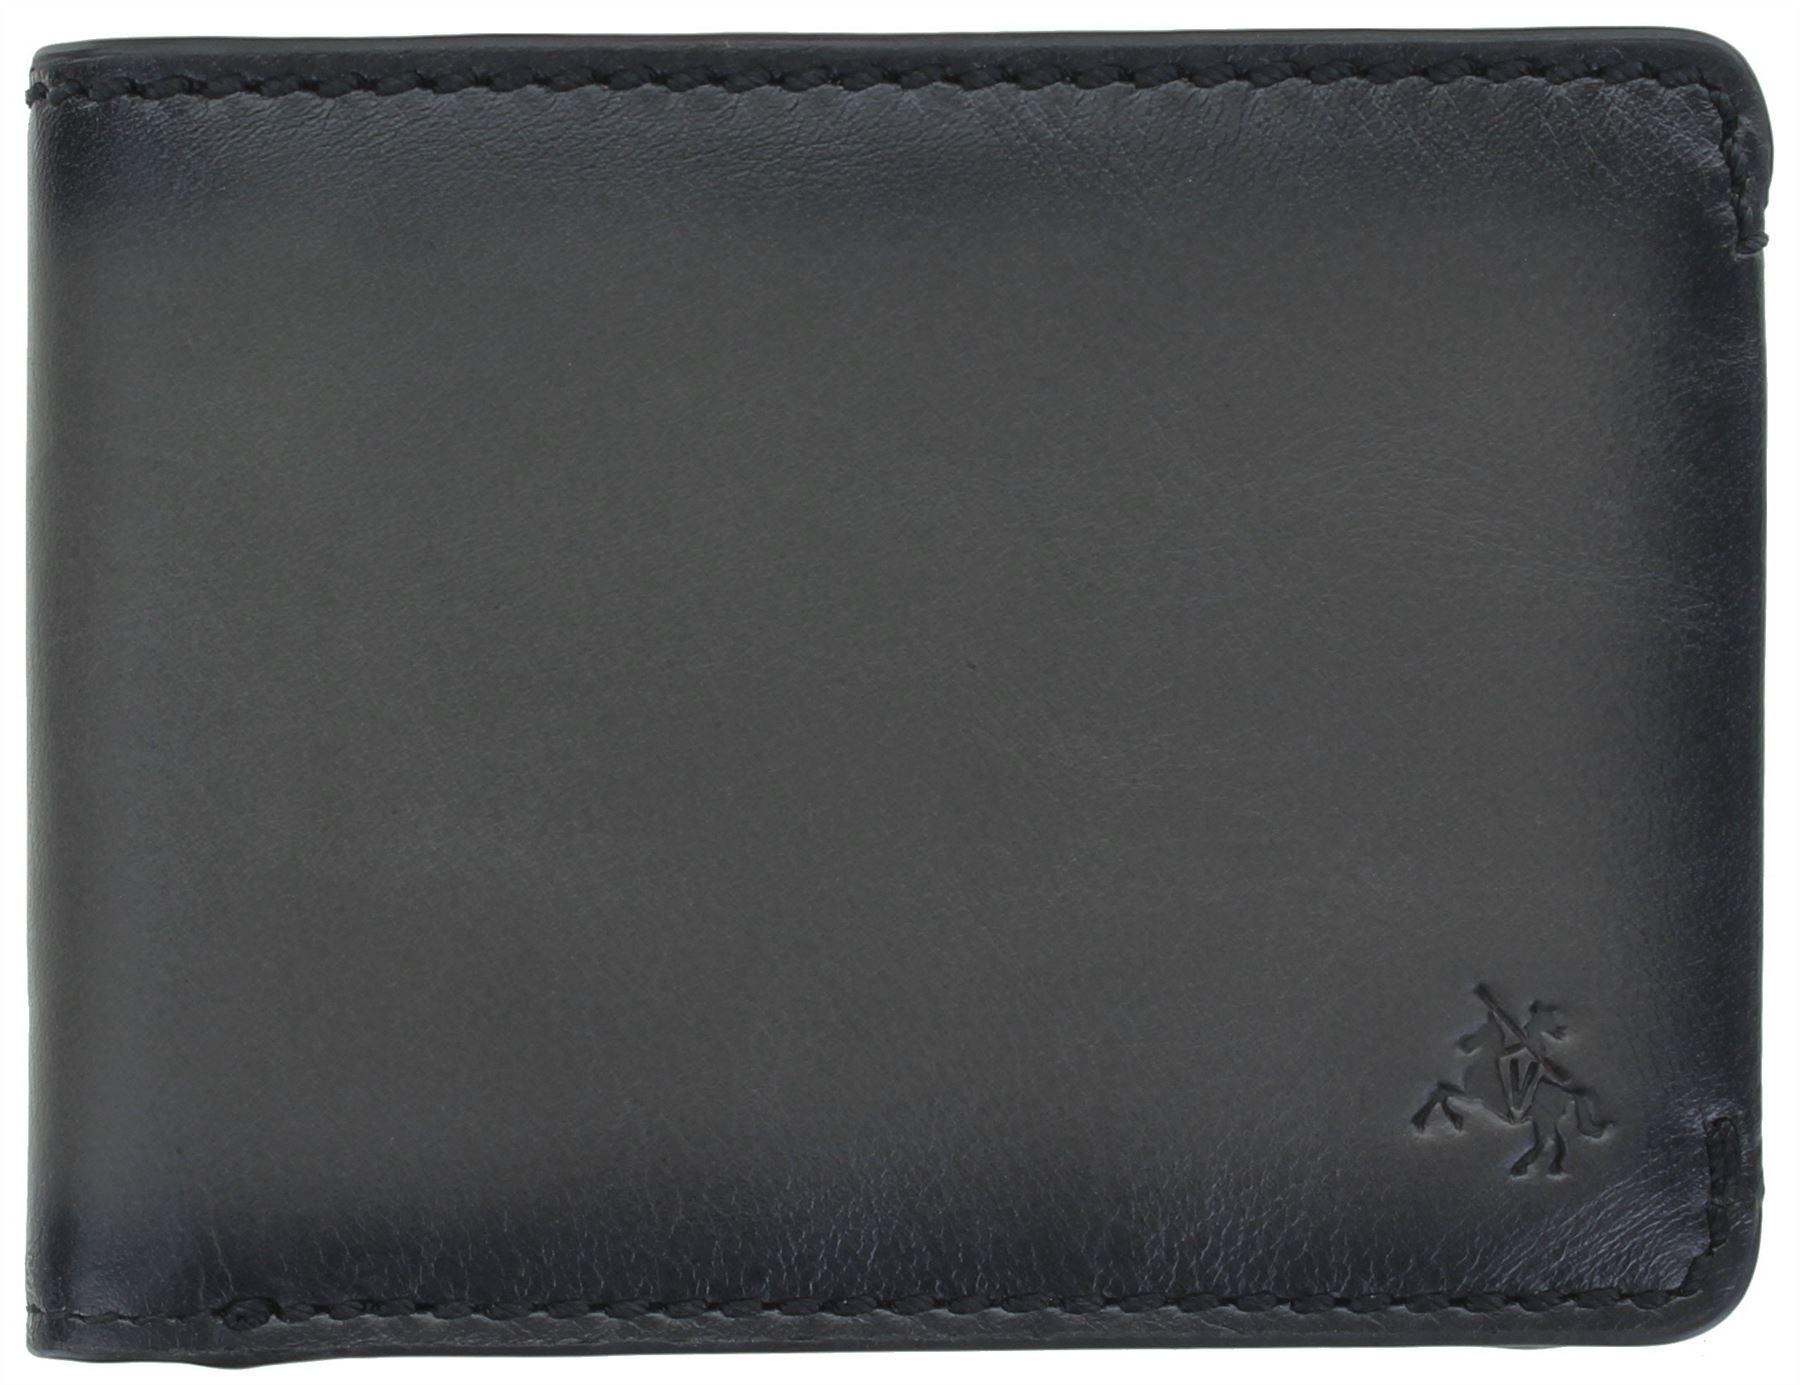 Behno Frida Pebble Leather Top-zip Wallet-Mango (Wallets and Small Leather  Goods,Wallets)